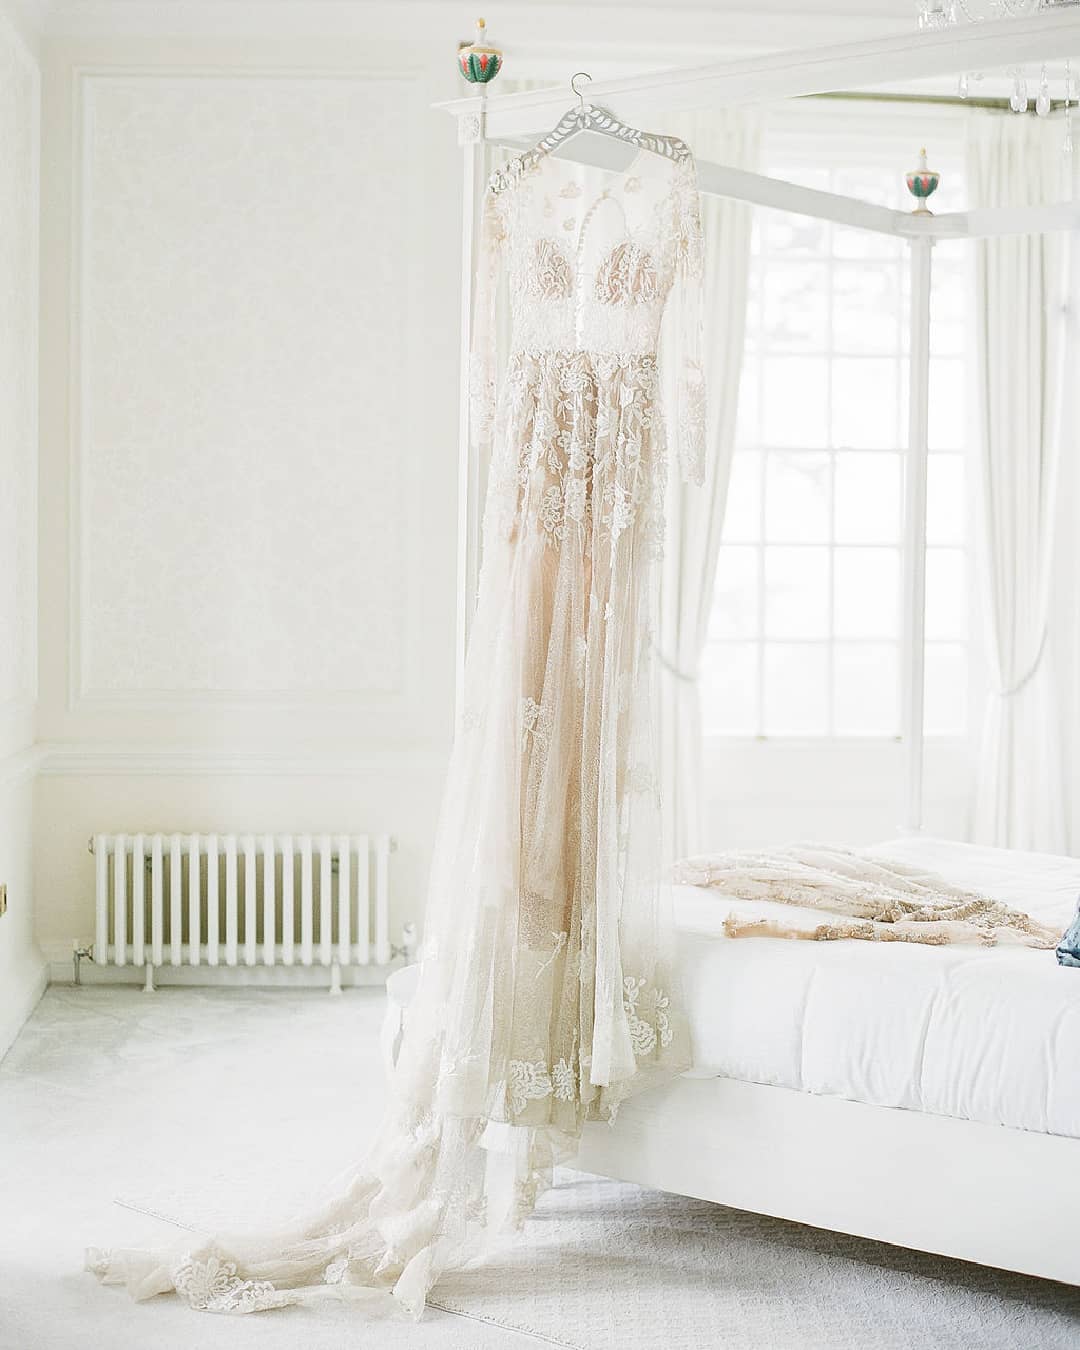 luxury wedding dress with lace embroidery hanging from a canopy bed at an English manor house wedding venue